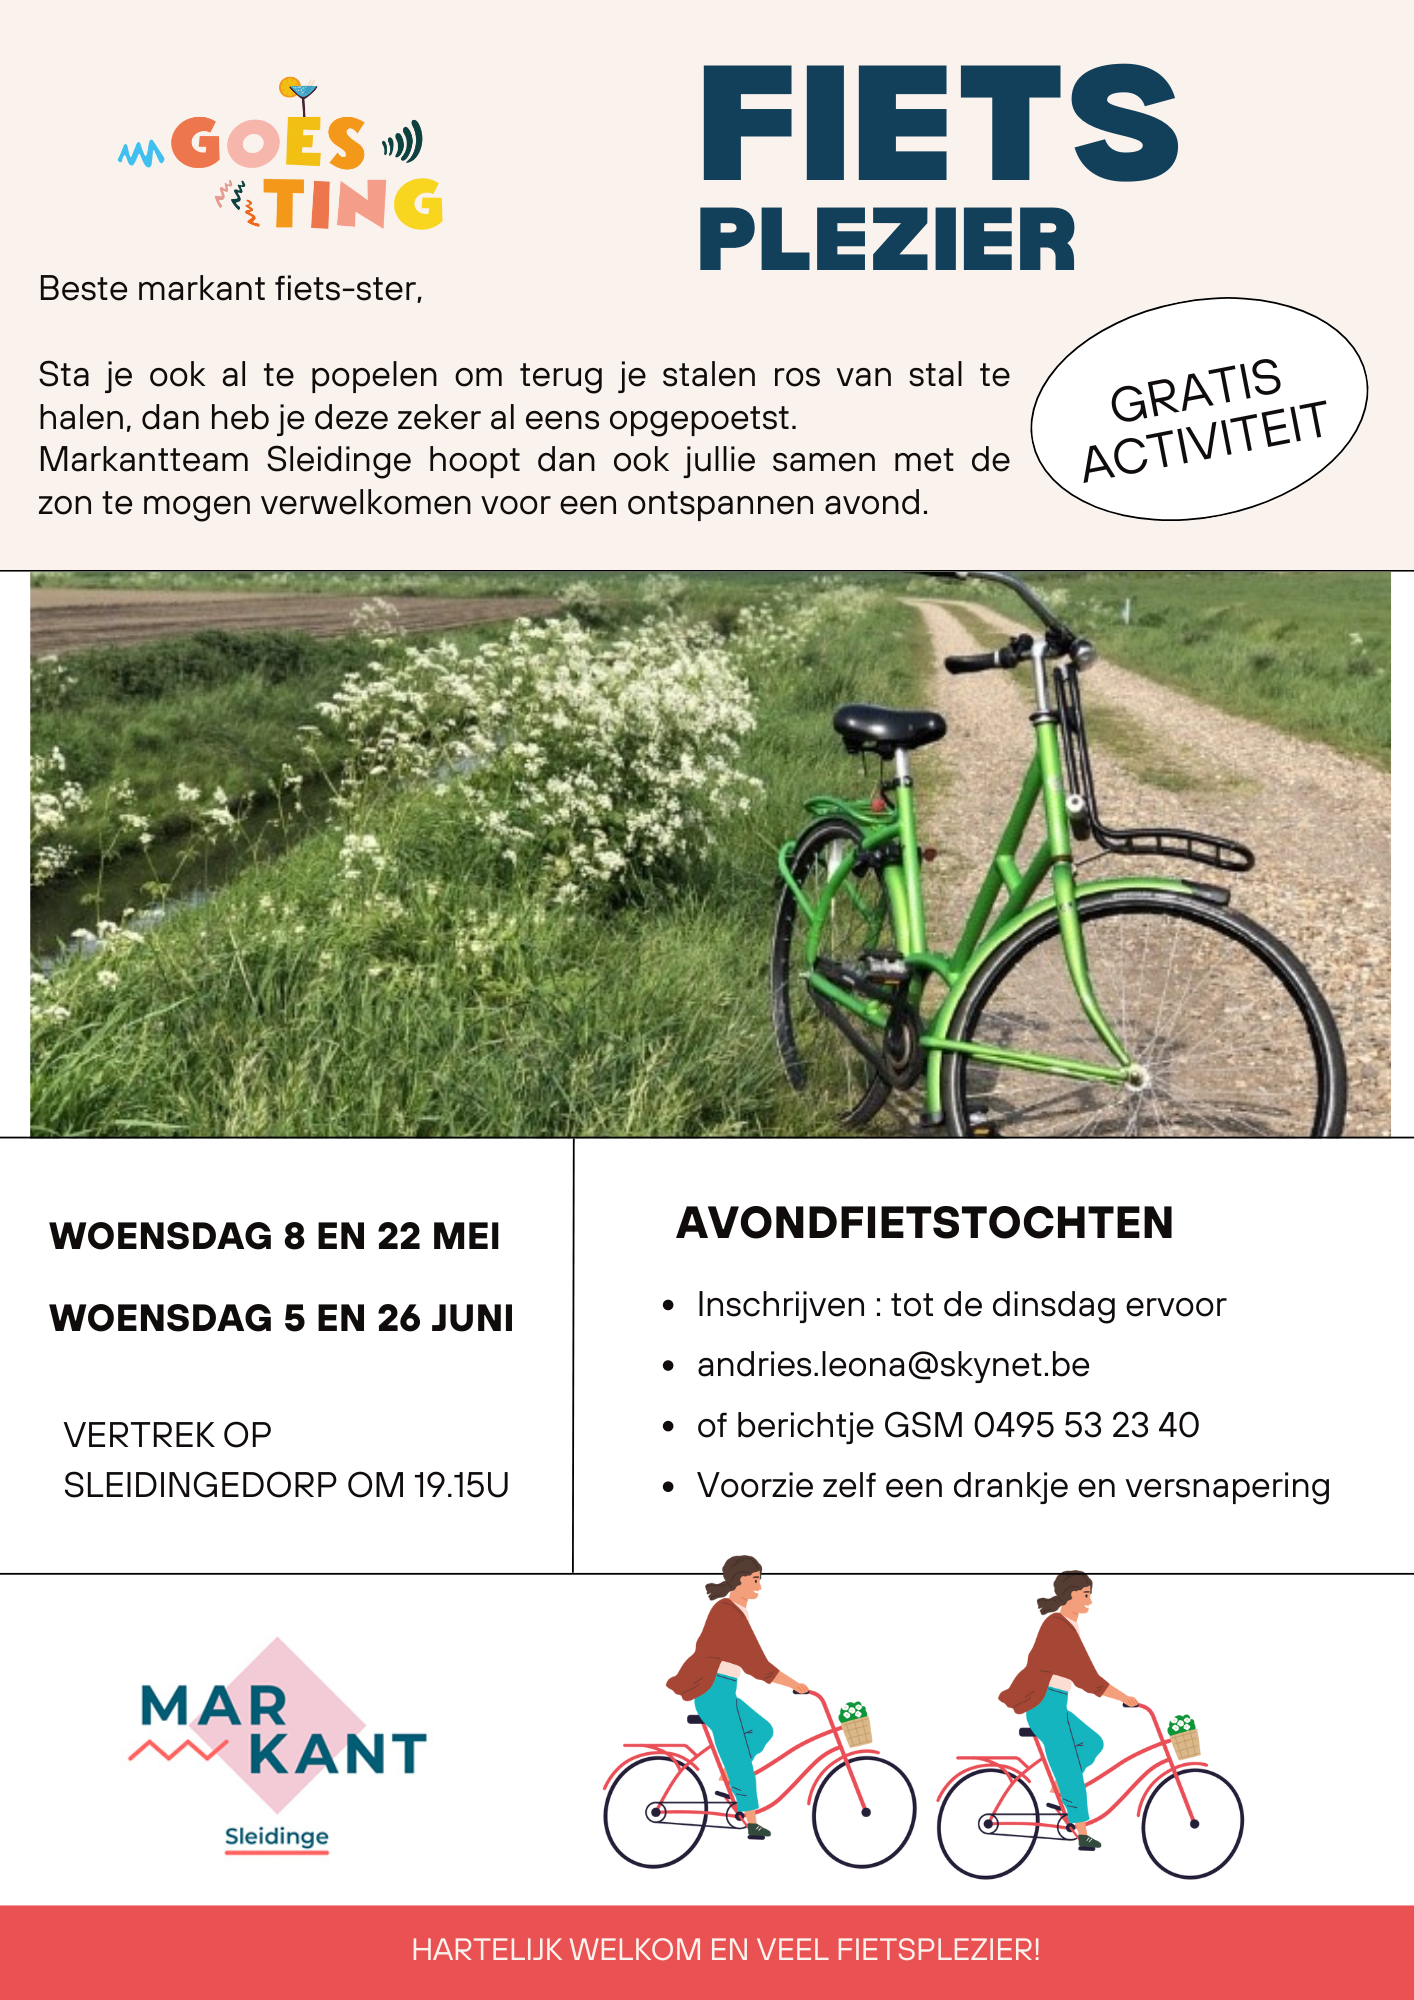 https://madyna.be/storage/activity_photos/665222b1adb0f/Markant uitnodiging FIets plezier.png